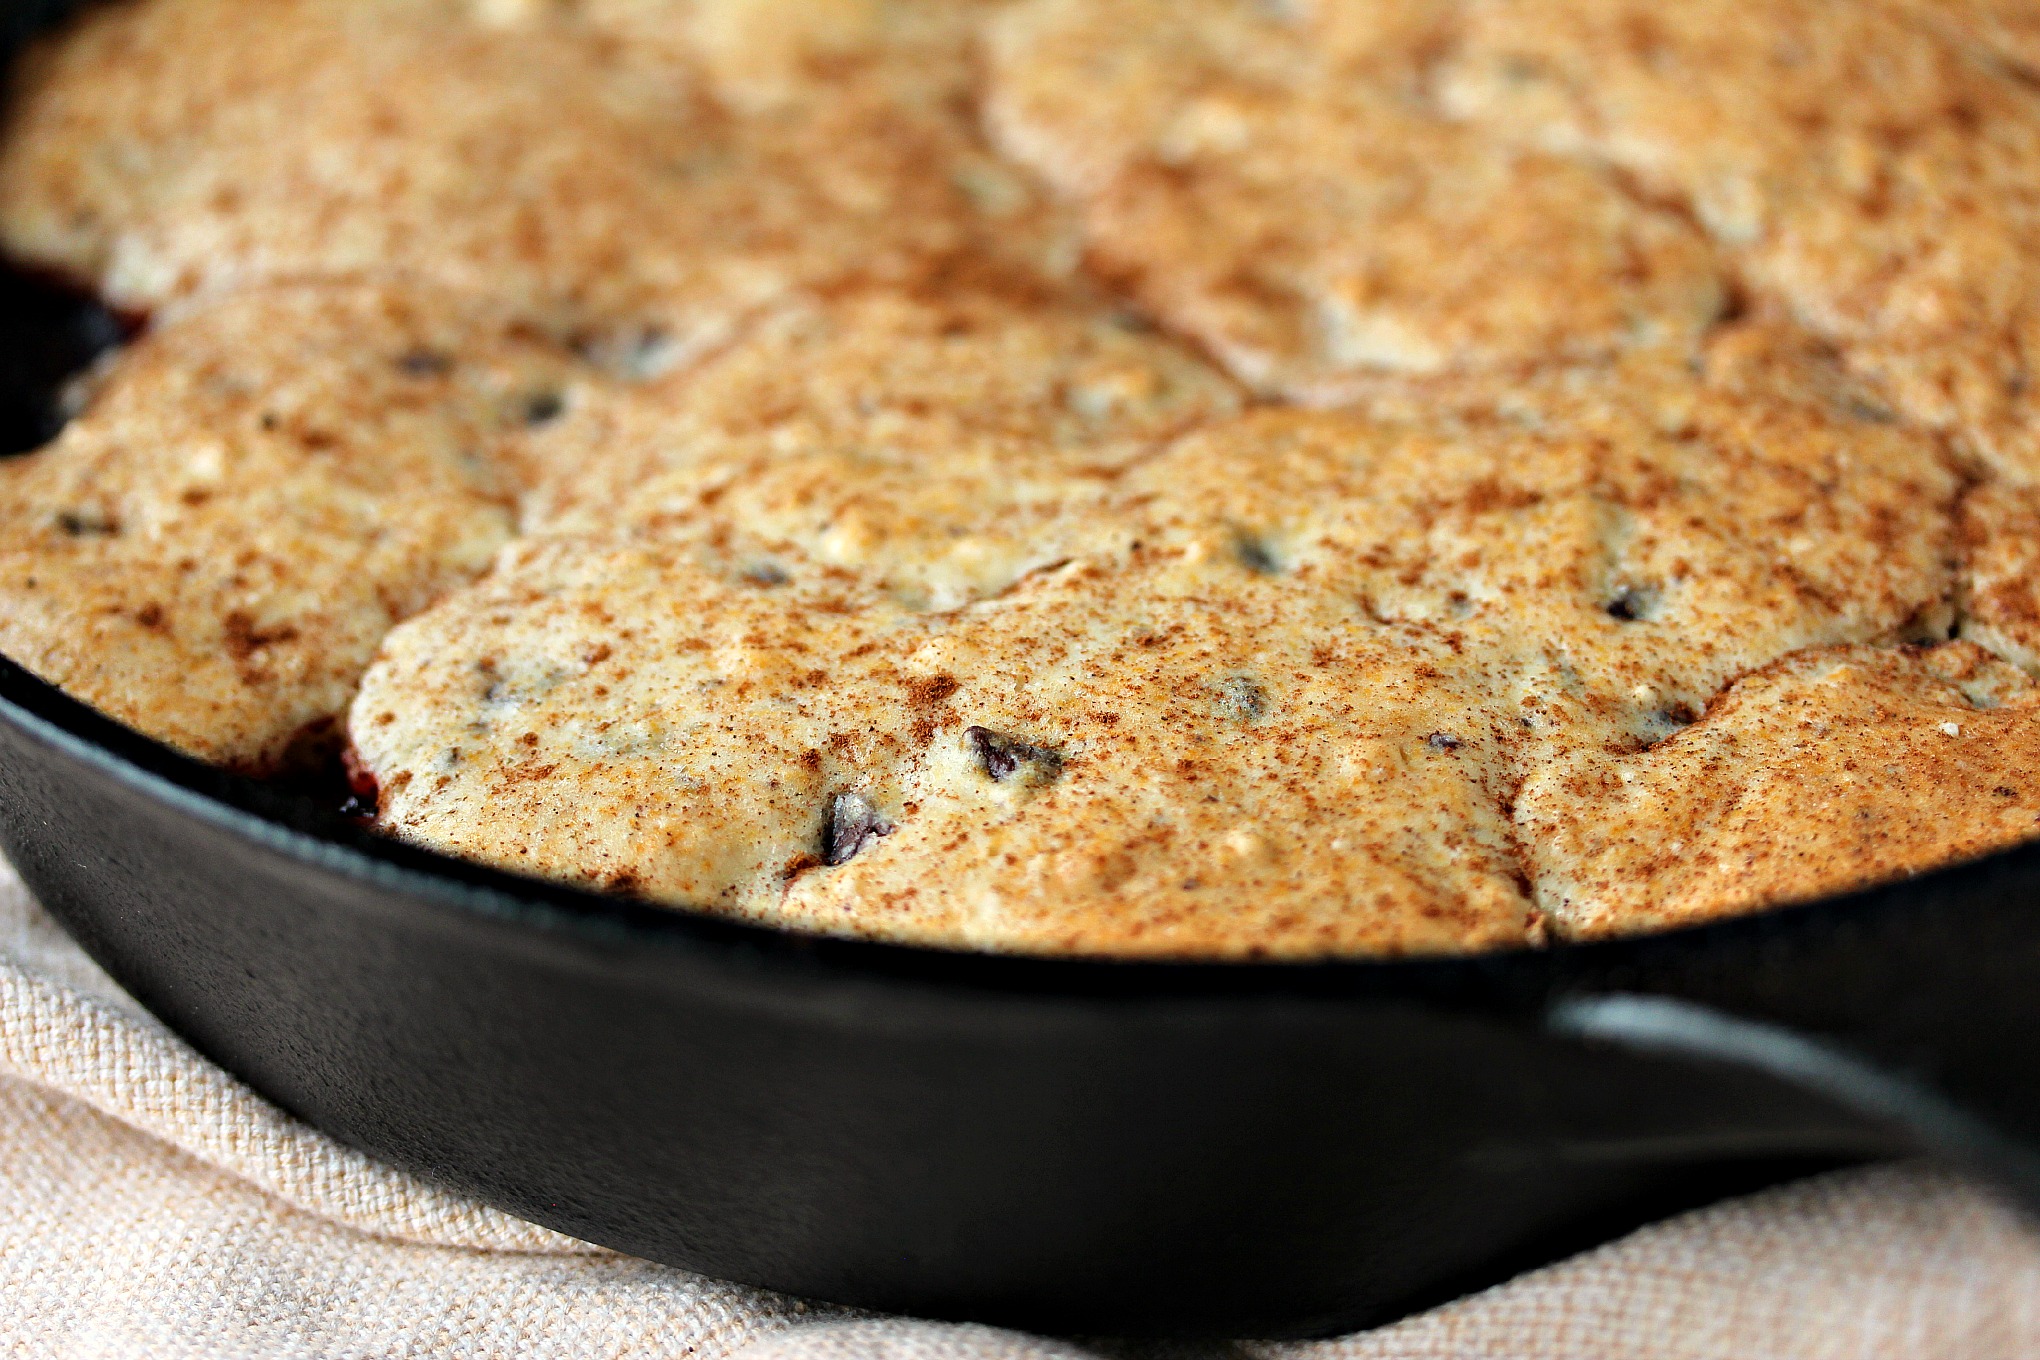 Close up image of cherry cobbler with a chocolate chip muffin topping baked in a cast iron pan and resting on a beige napkin.